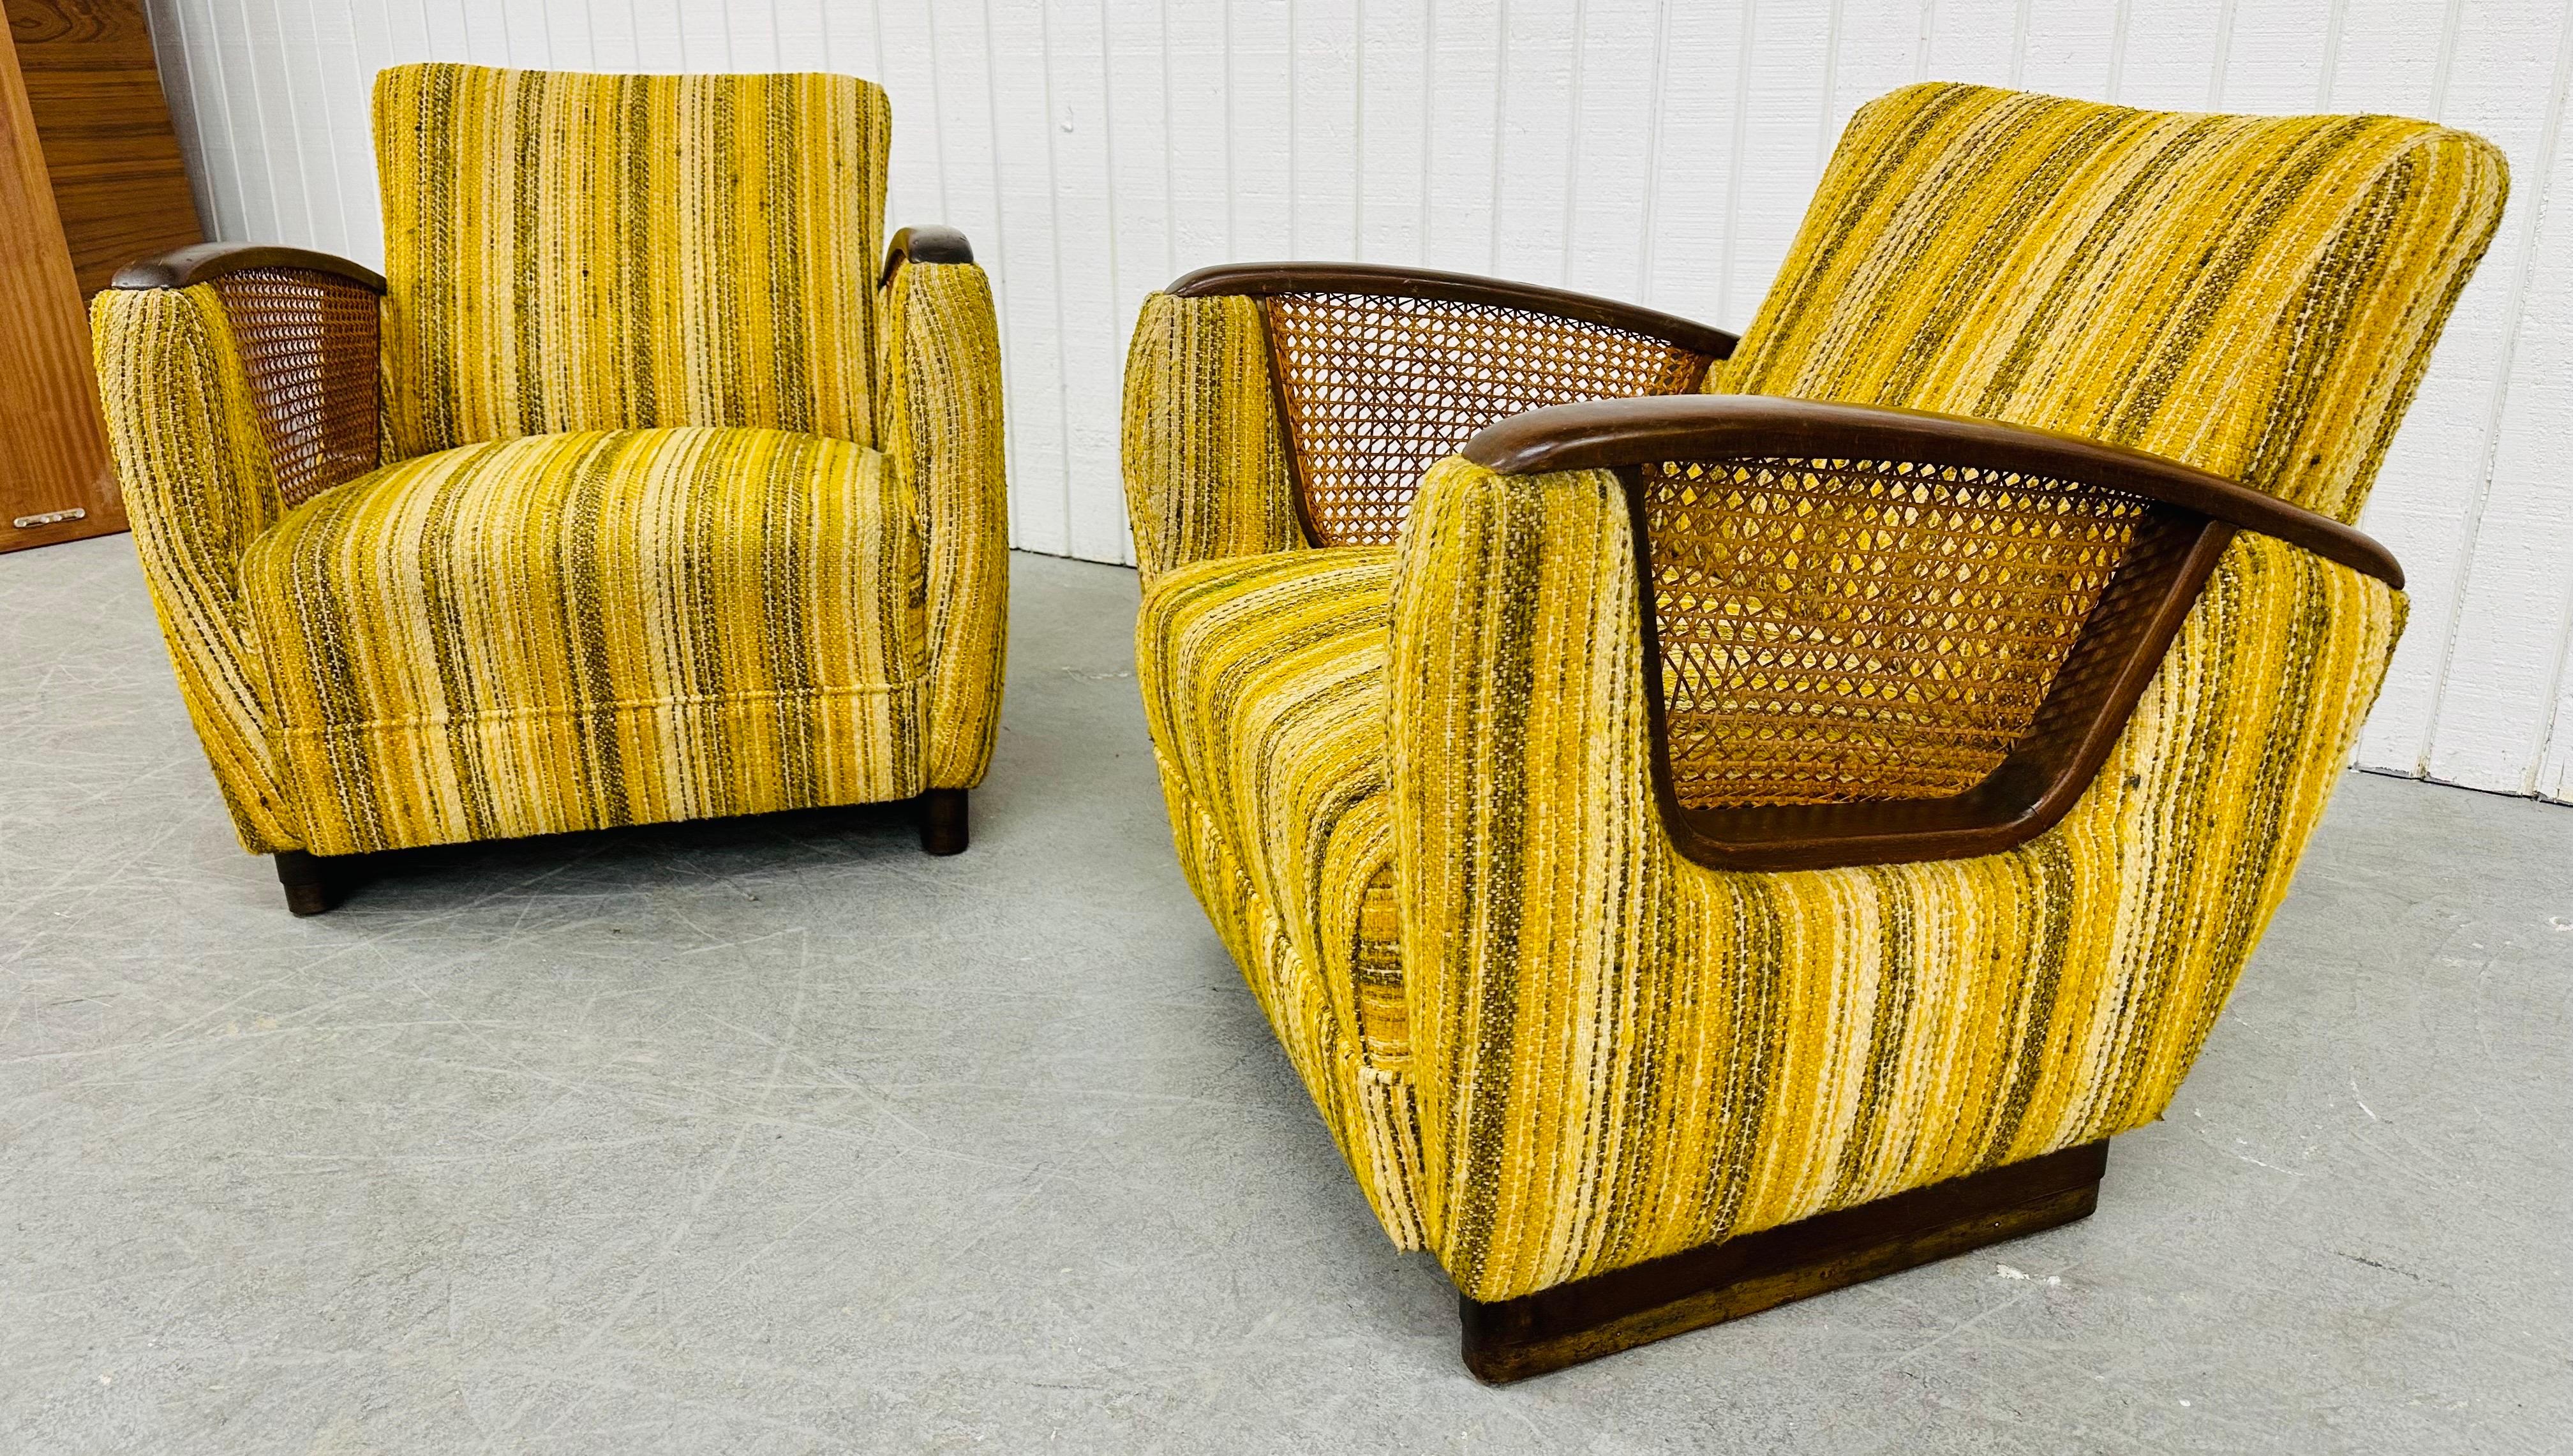 American Mid-Century Modern Deco Style Club Chairs - Set of 2 For Sale